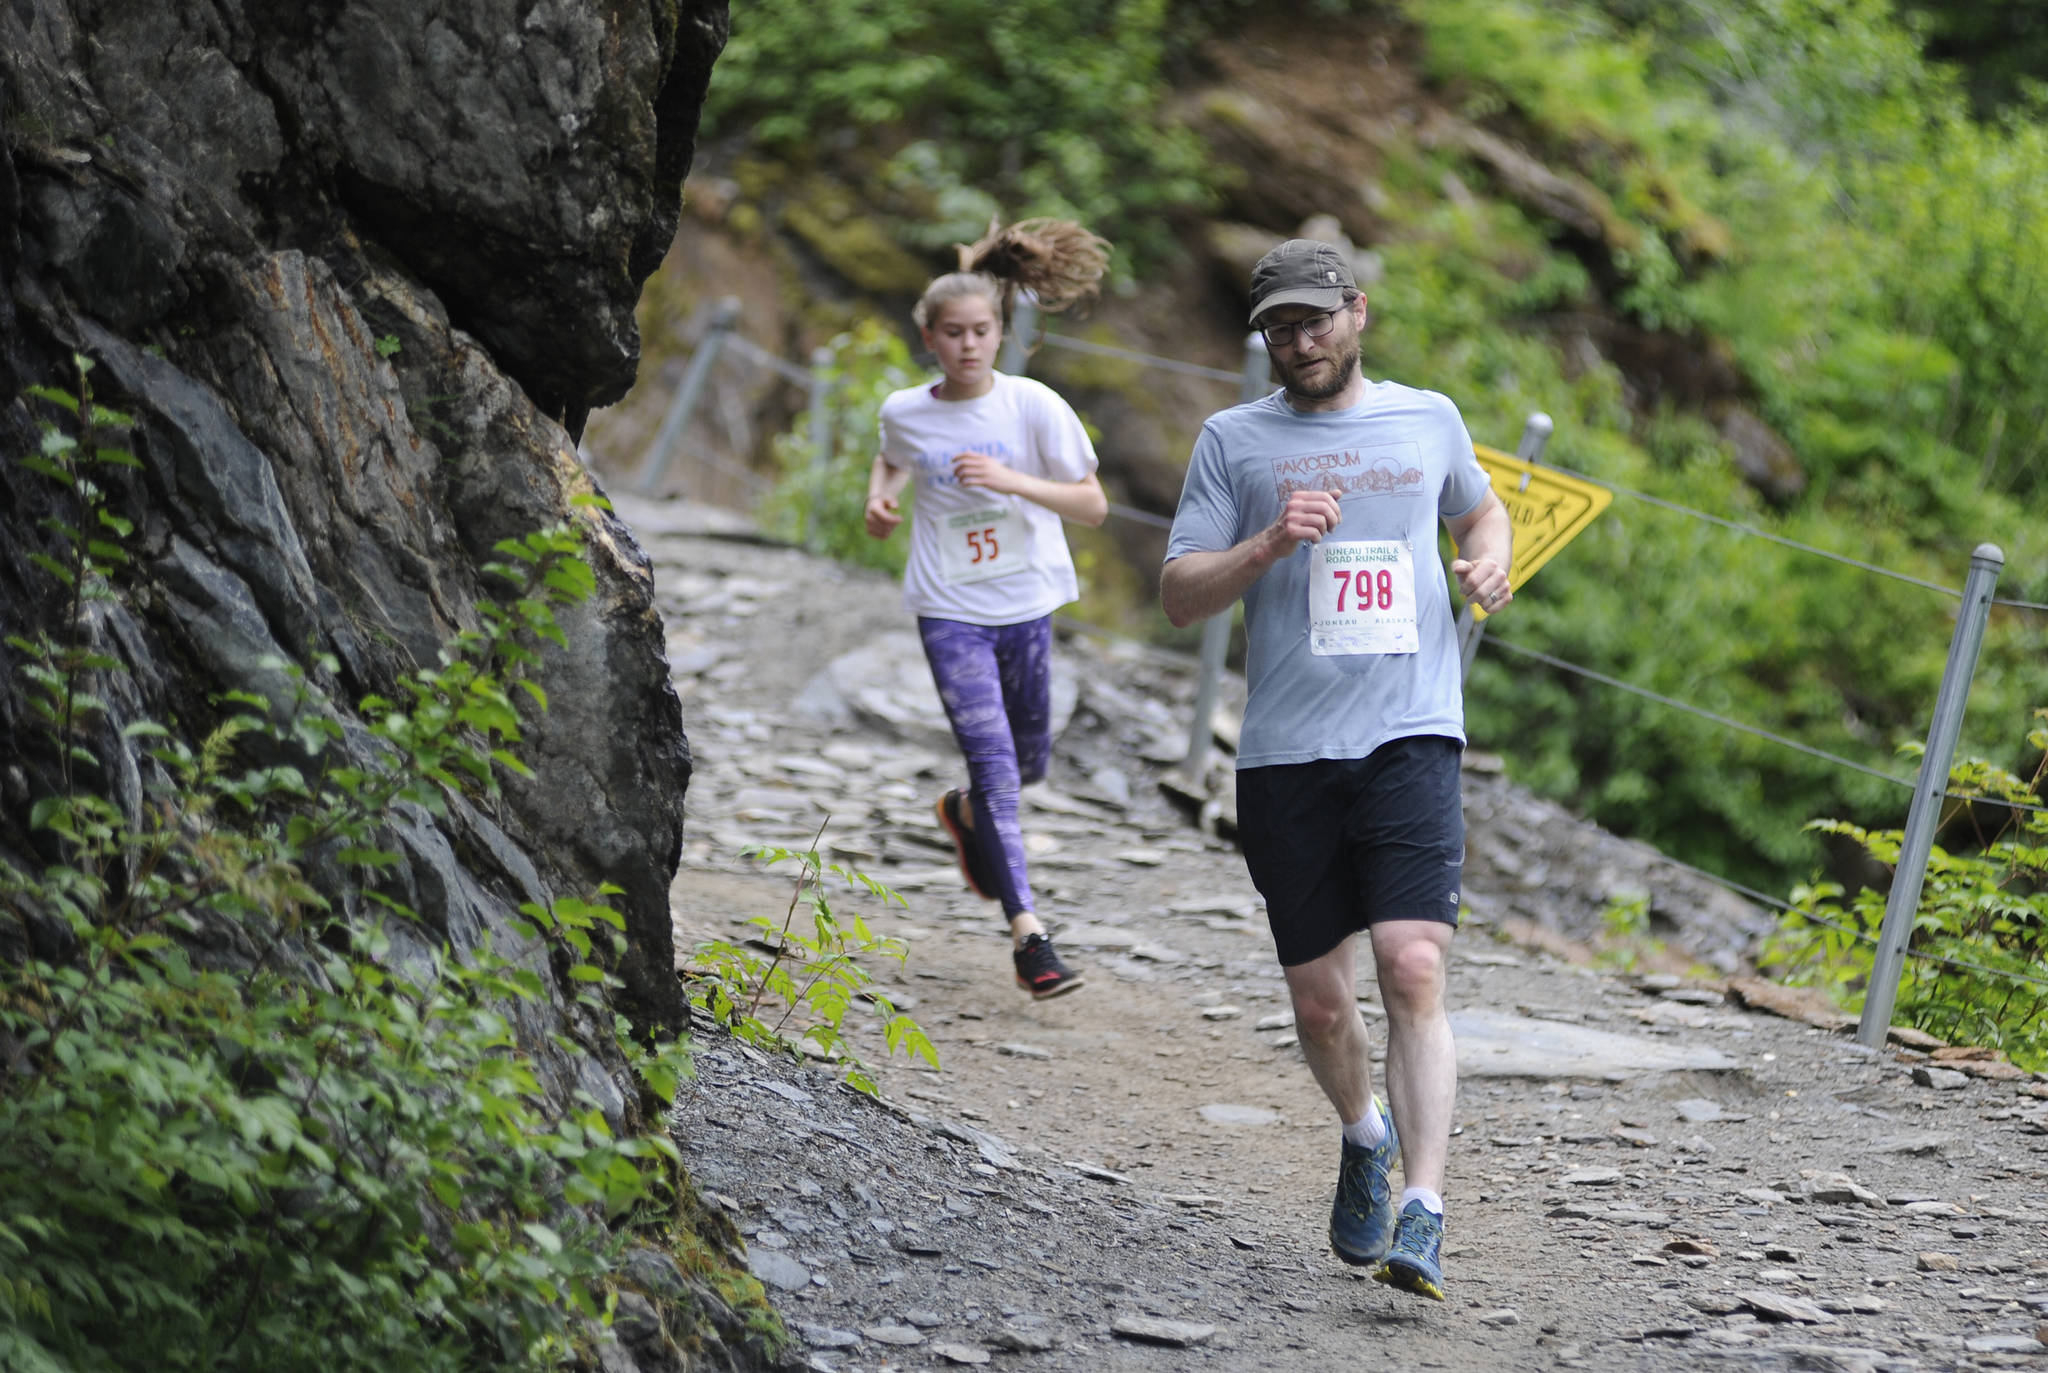 Steve Morley leads Maisy Morley down Perseverance Trail during the Perseverance Trail Run/Ben Blackgoat Memorial on Saturday. (Nolin Ainsworth | Juneau Empire)